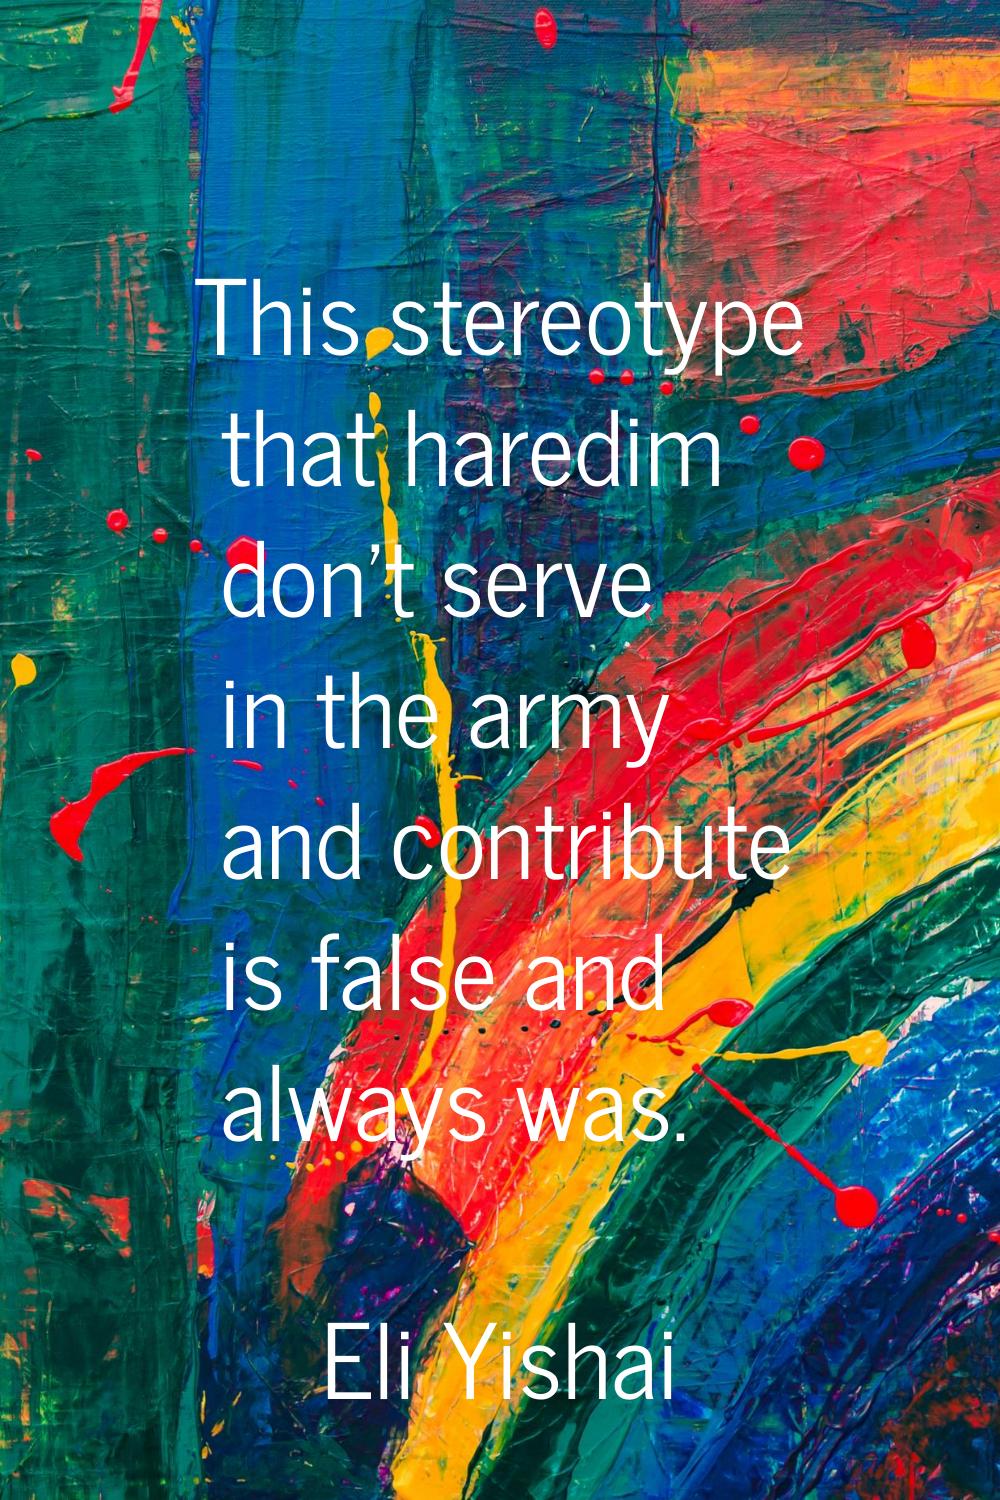 This stereotype that haredim don't serve in the army and contribute is false and always was.